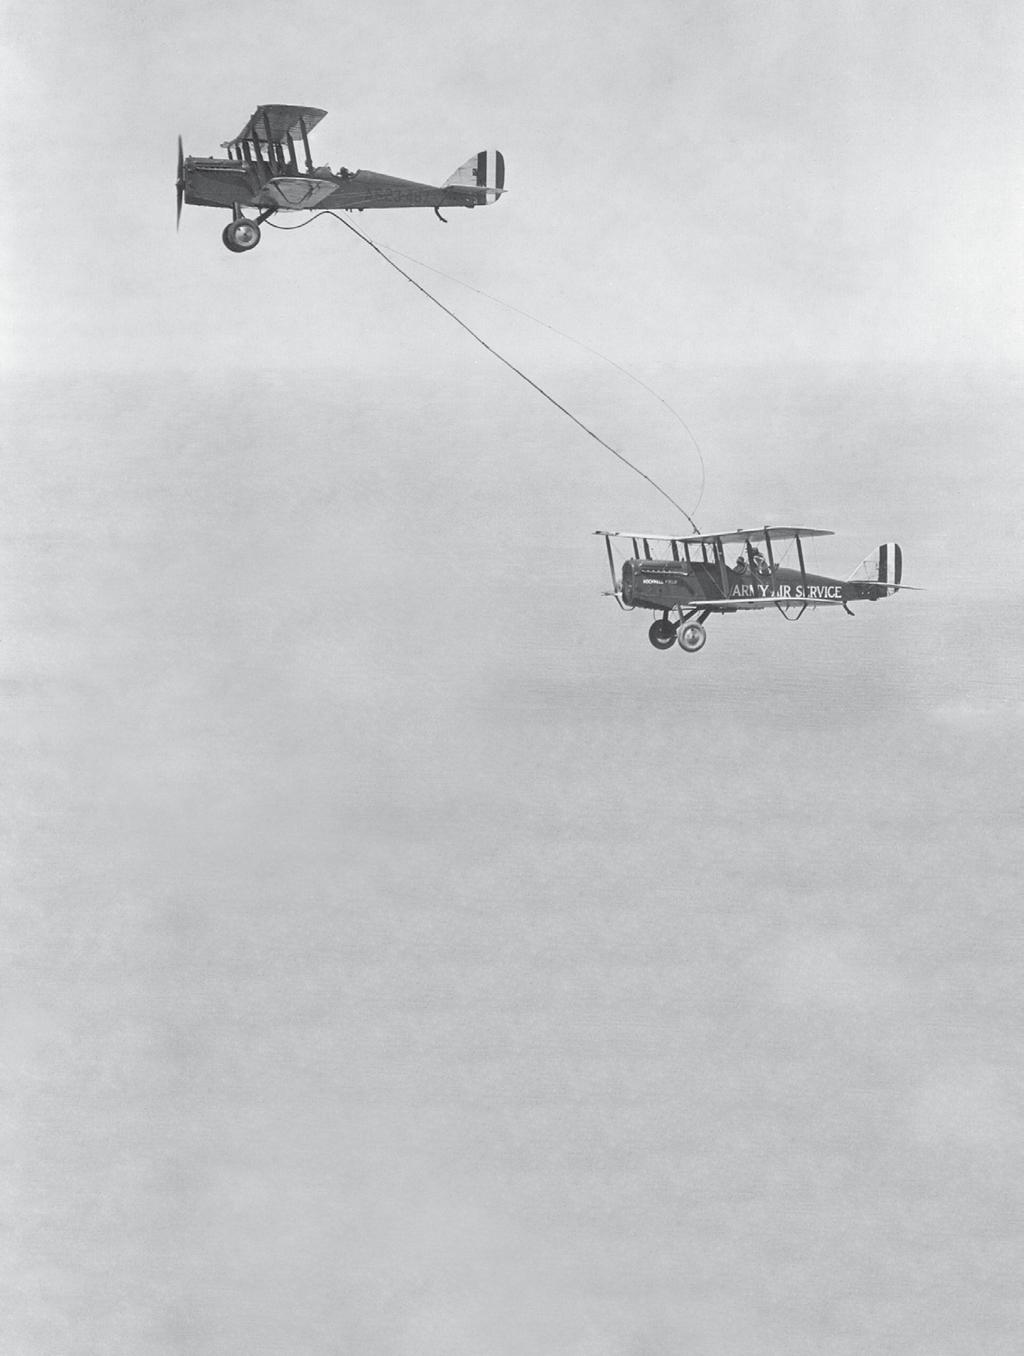 Seifert during one of the first recorded aerial refuelings. ARSAG has been working to improve aerial refueling for nearly 40 years.